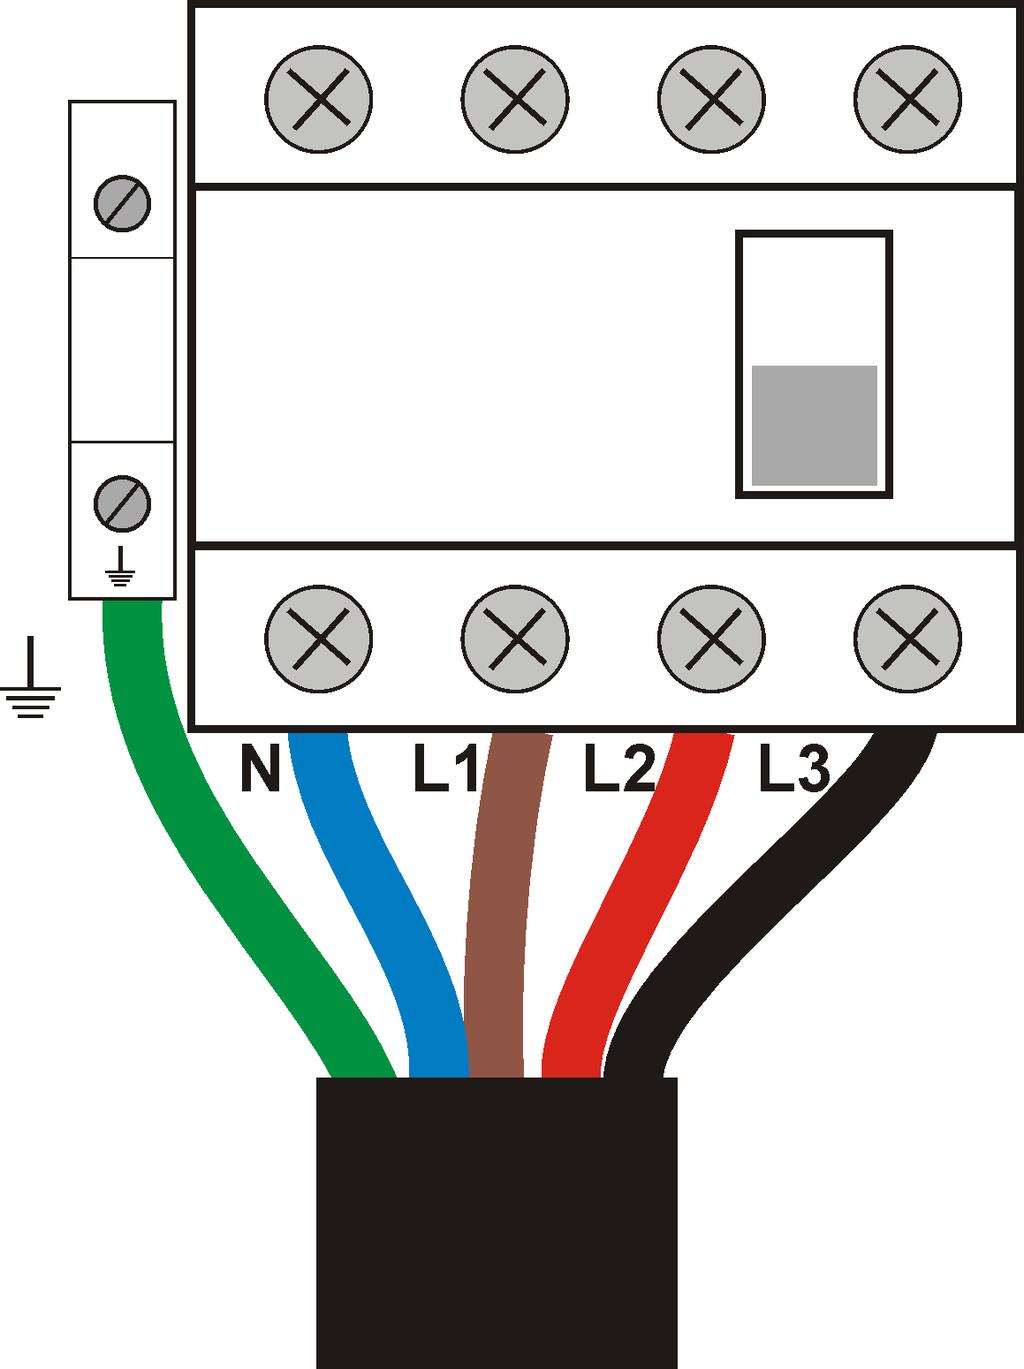 4.6. Power supply connection Note: Before working with the appliance, turn off the power supply (MCB) and secure against restart.